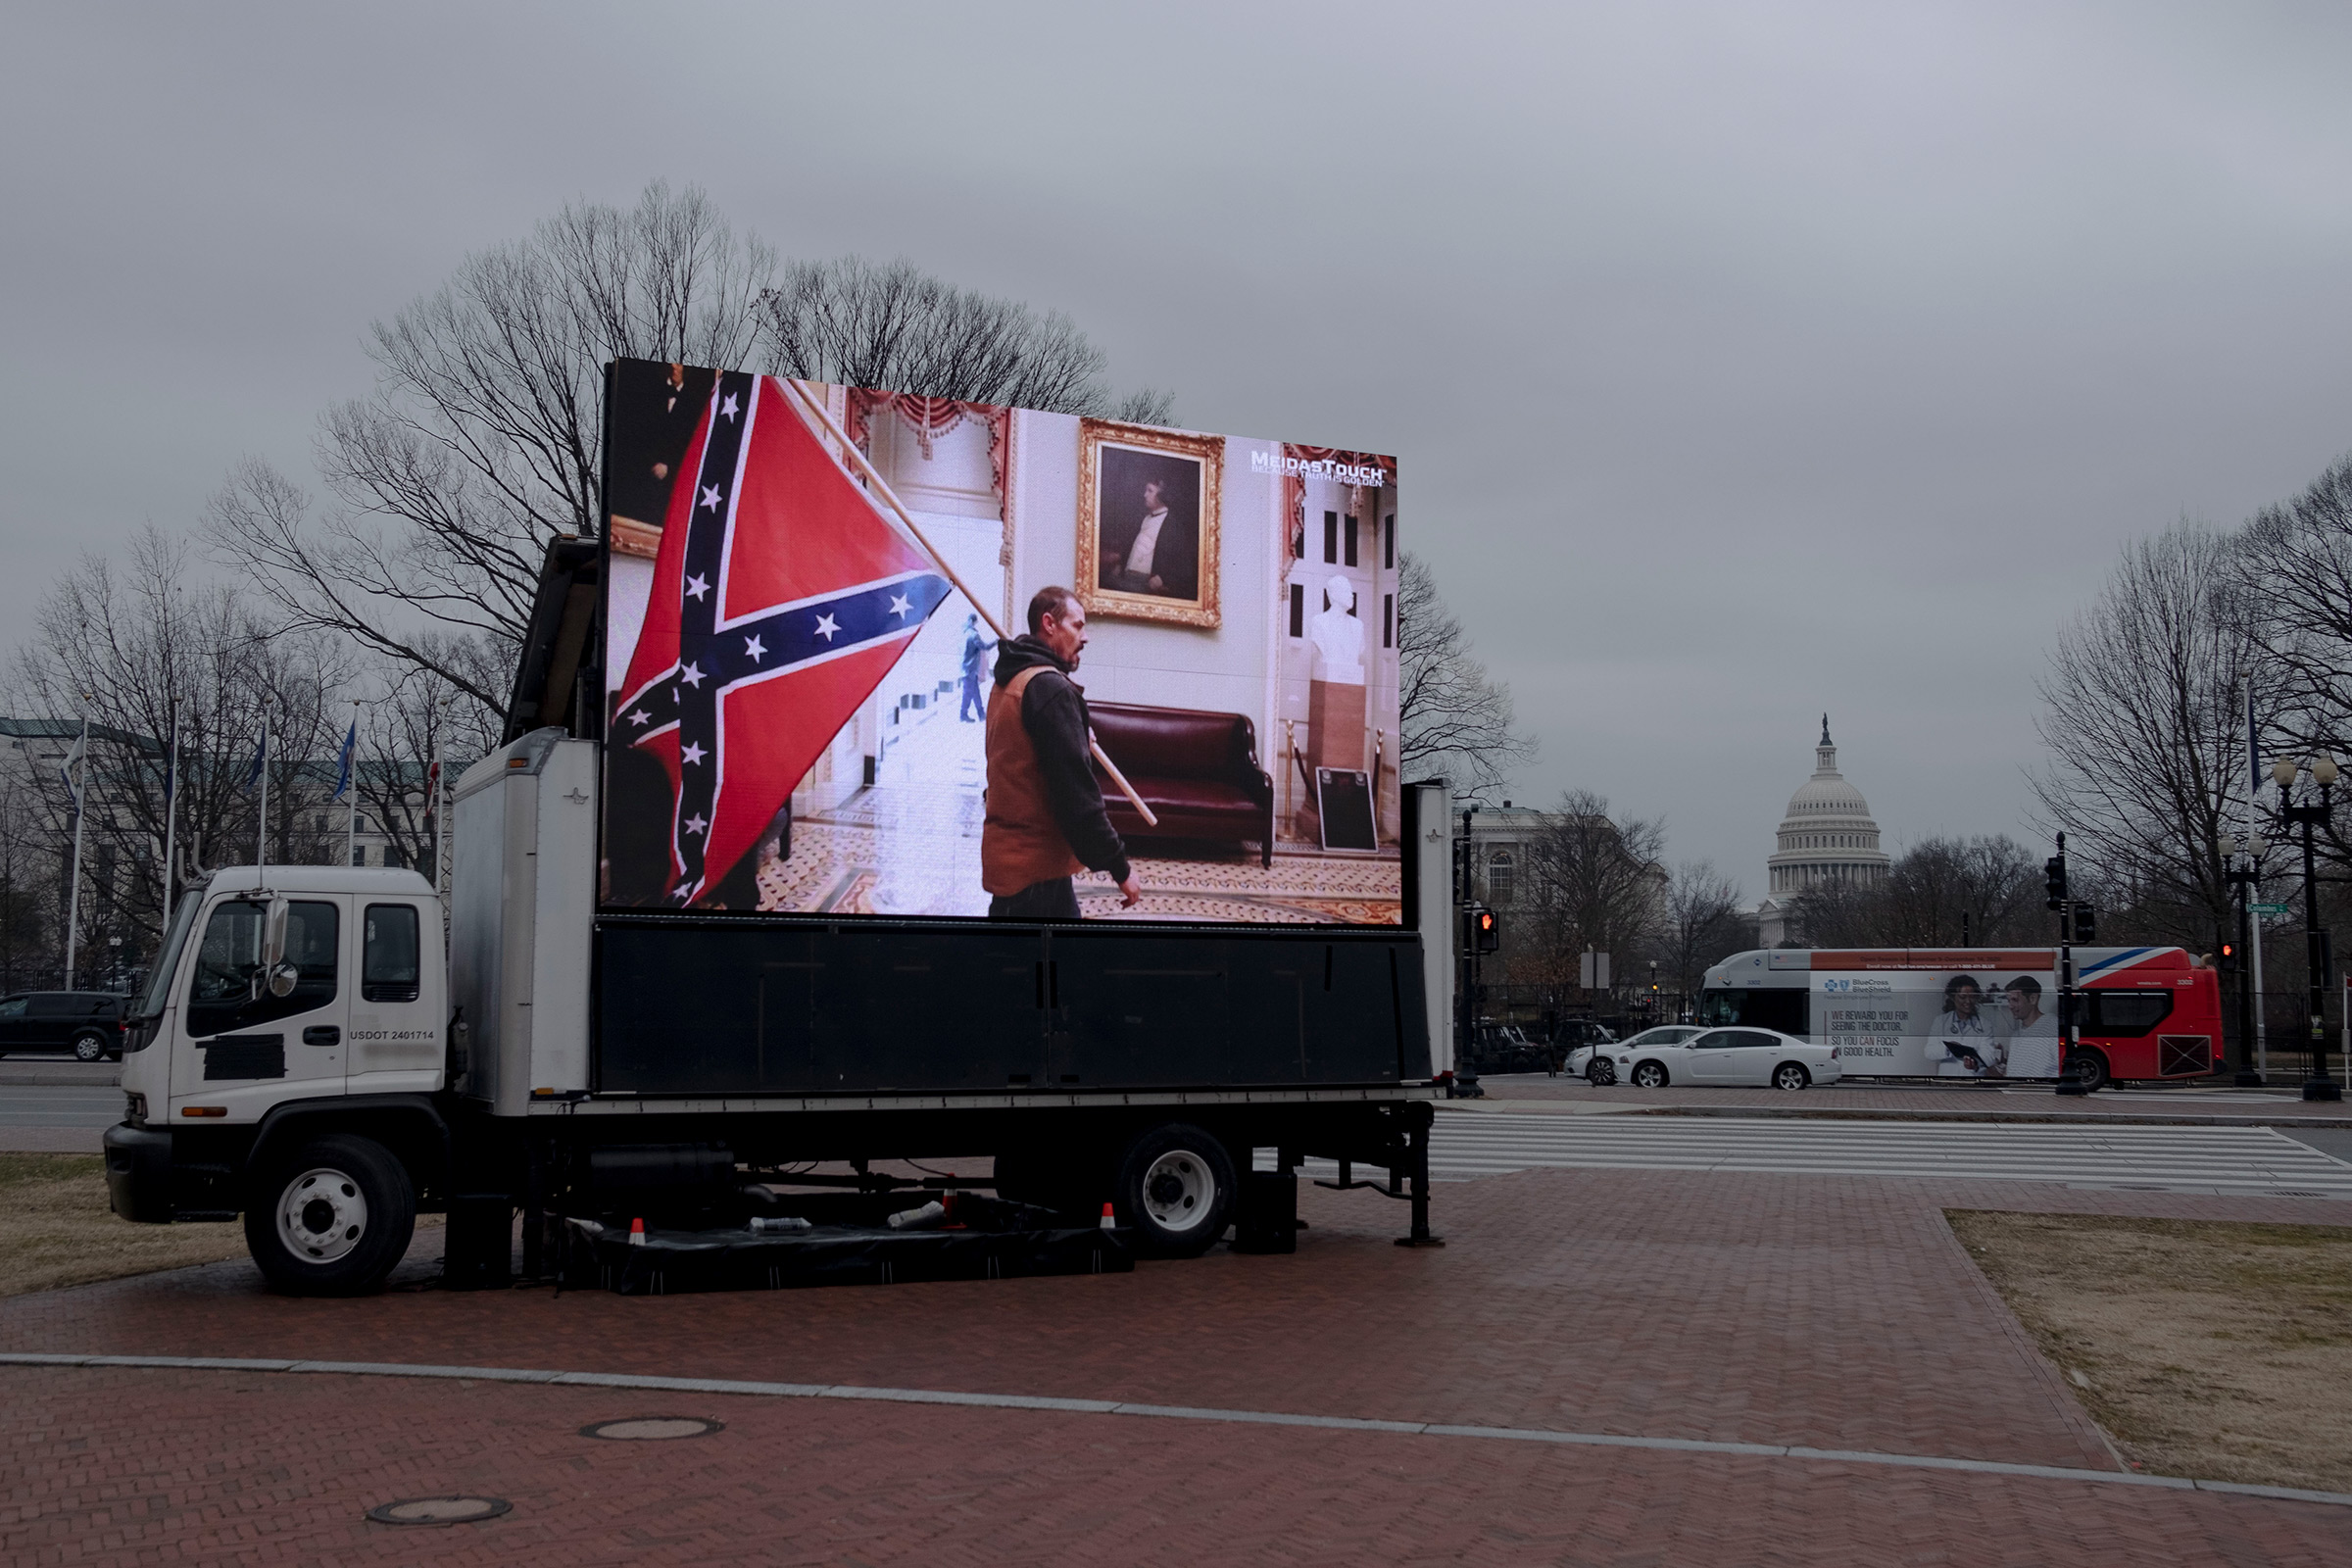 A truck operated by the SuperPAC Meidas Touch shows scenes from the insurrection outside Union Station during the impeachment trial of former president Donald Trump in Washington, on Feb. 10, 2021. (Gabriella Demczuk for TIME)